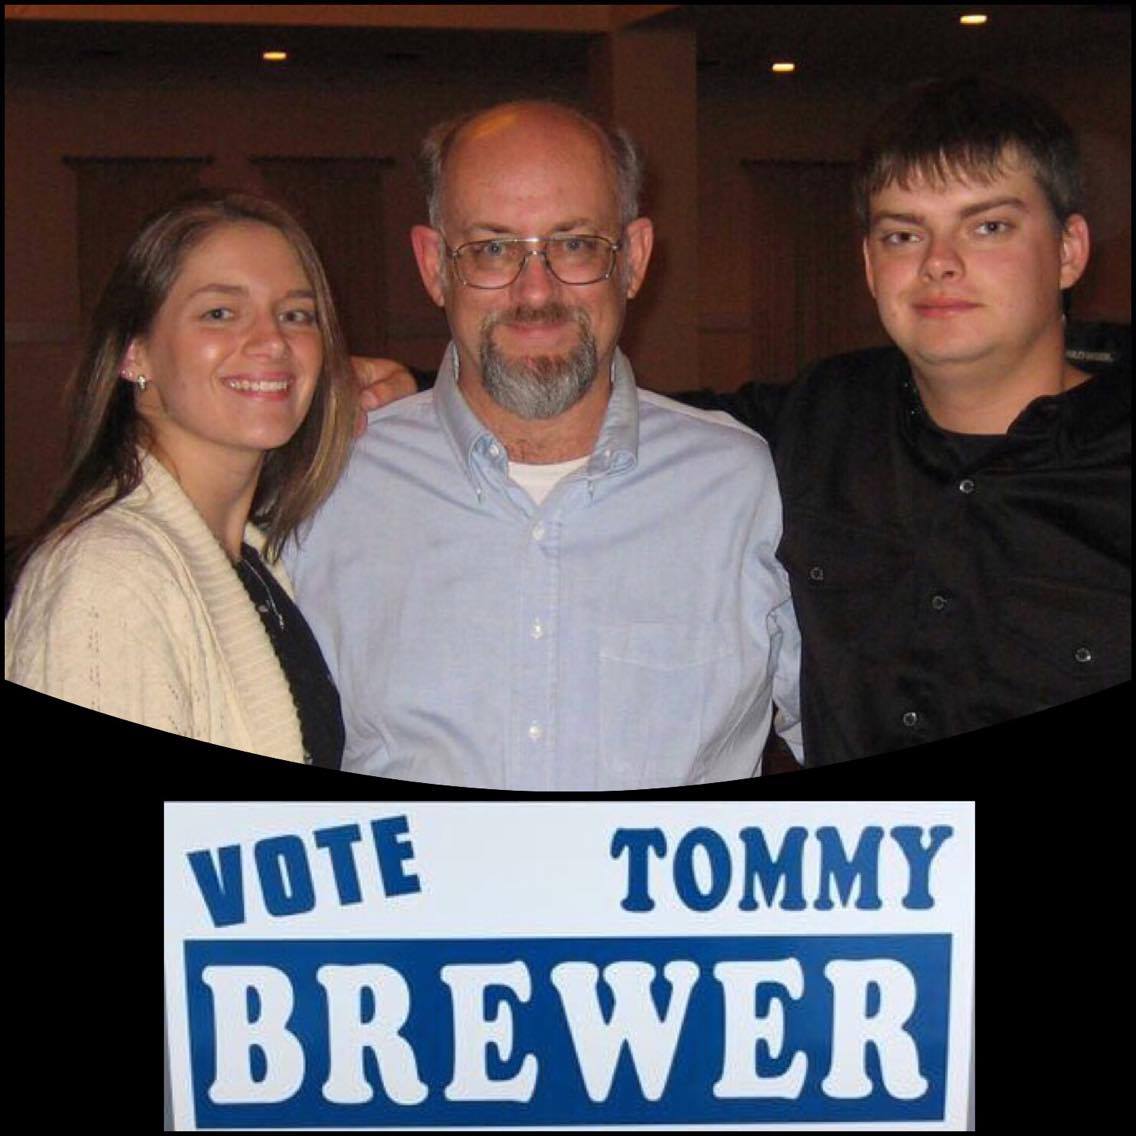 Brewer running for place 3 on Trussville Council 